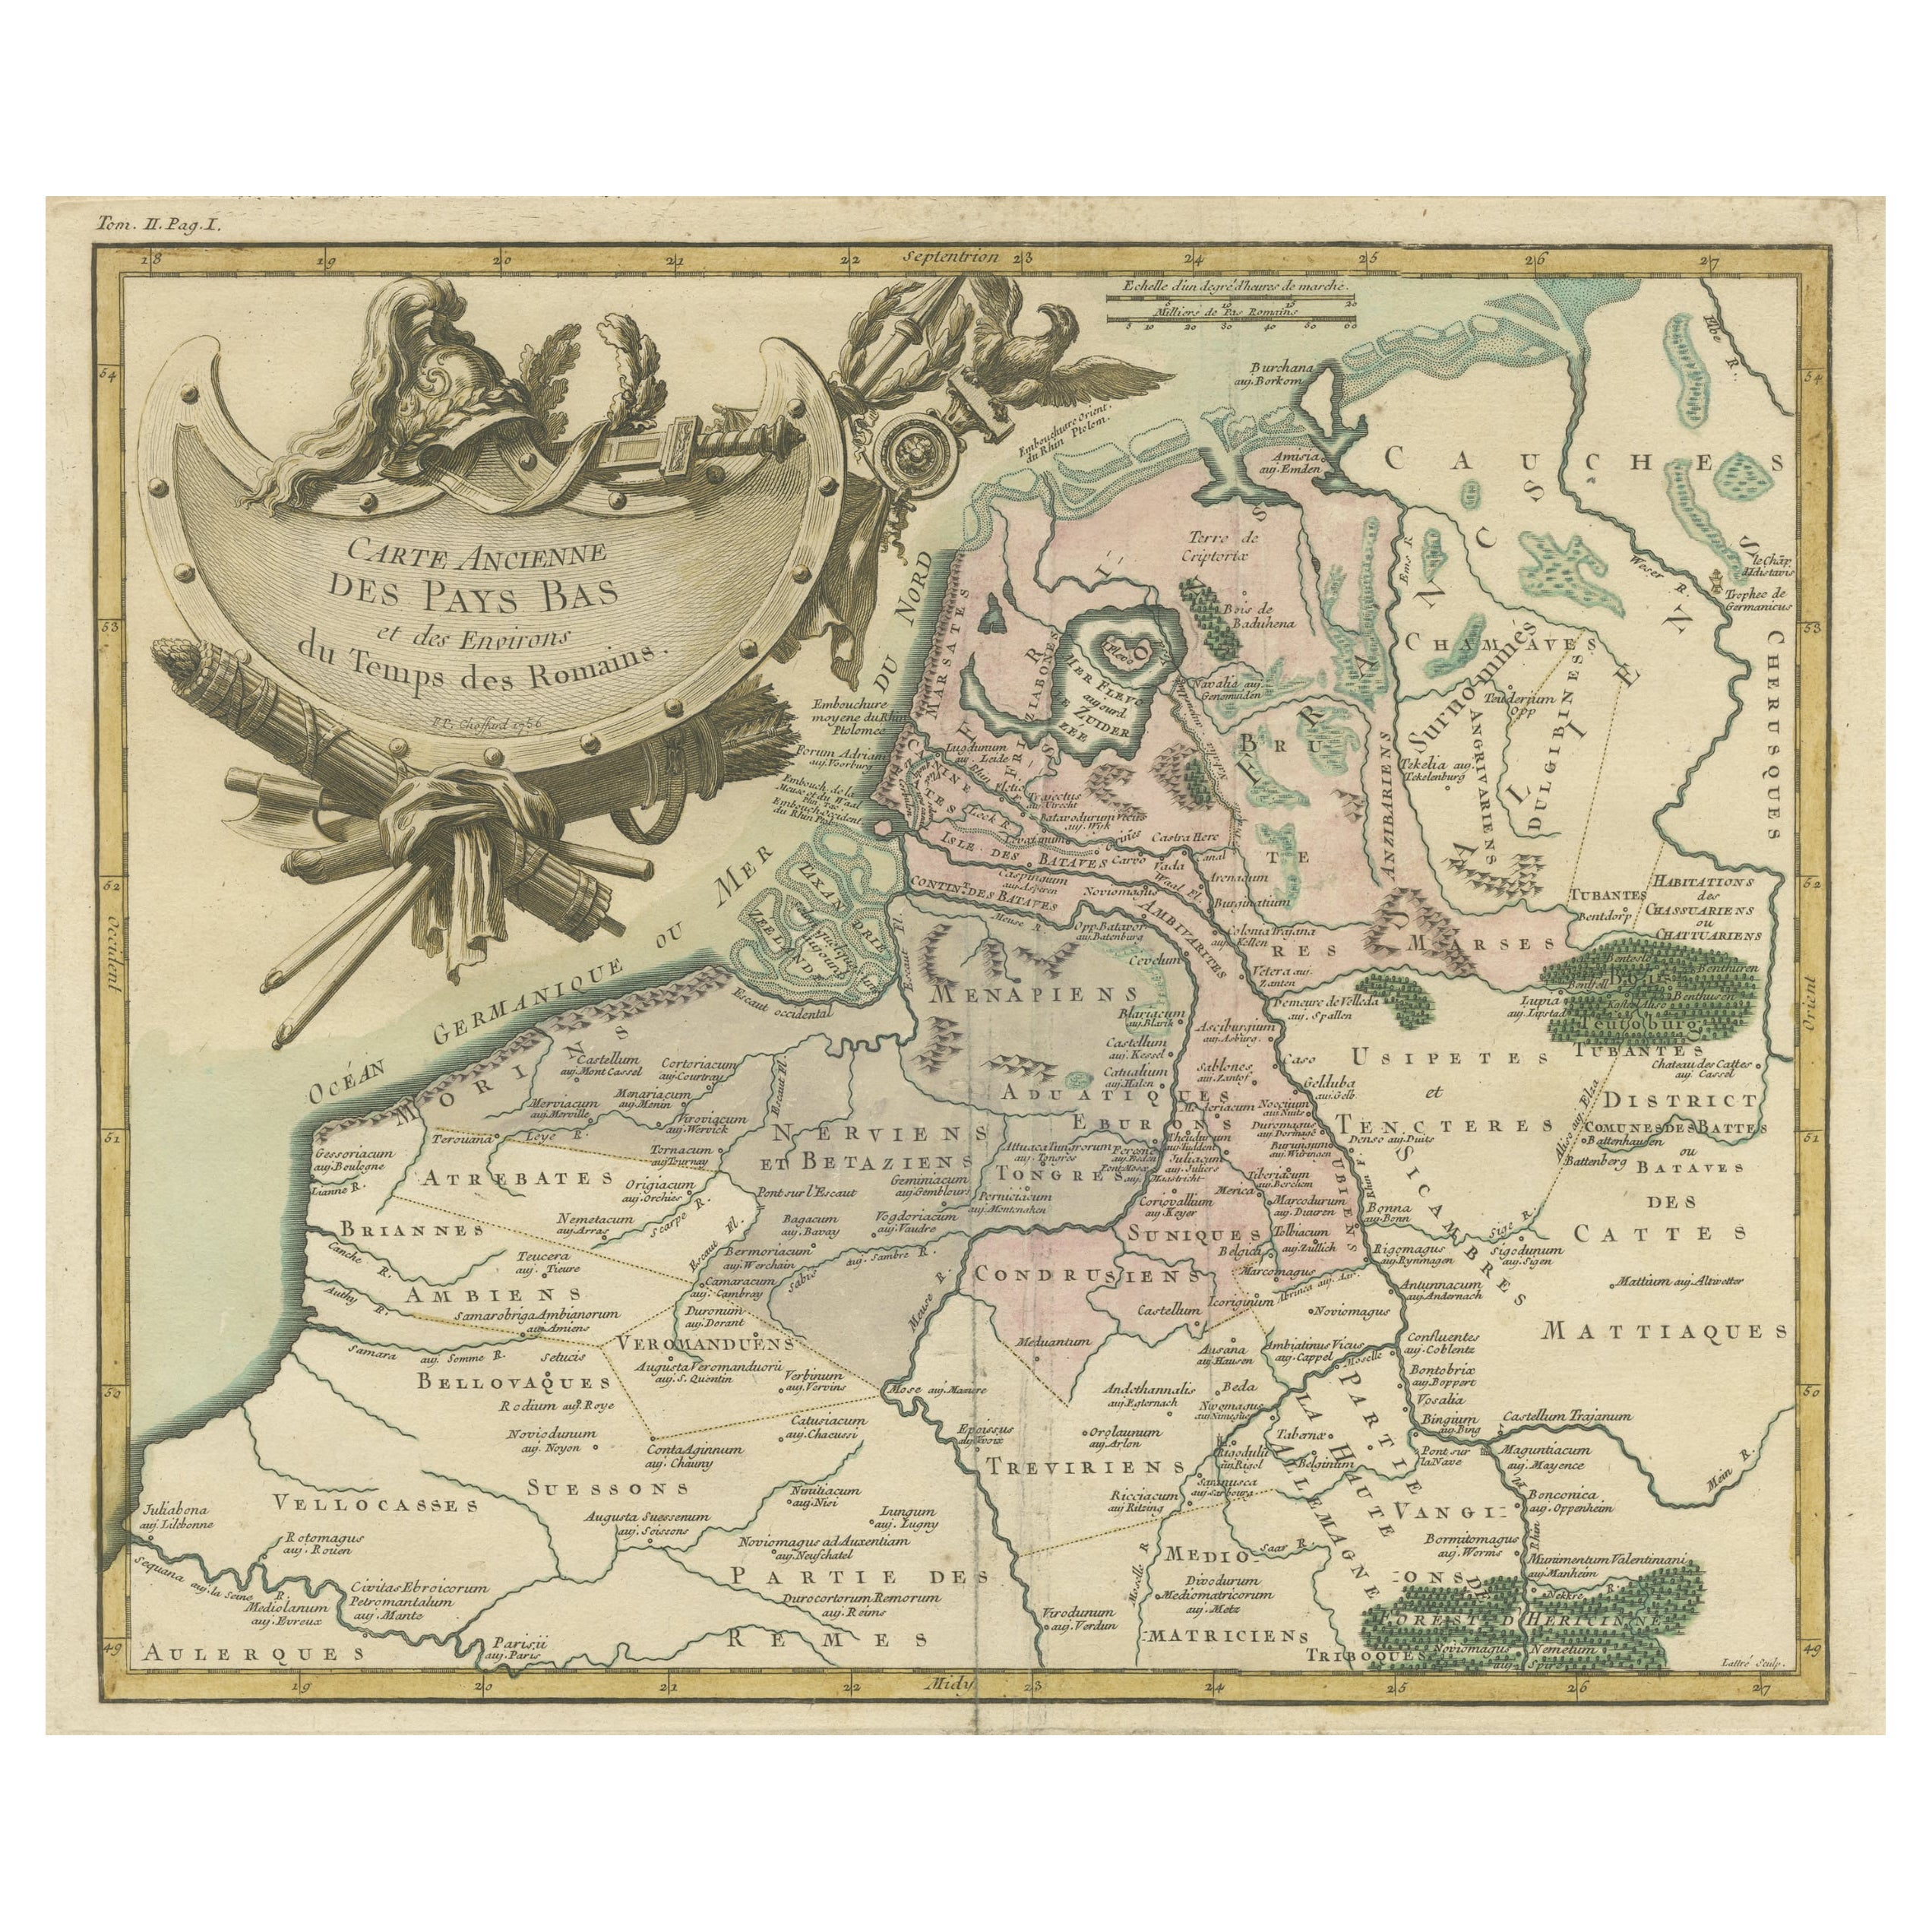 Antique Map of the Netherlands in the time of the Domination by the Roman Empire For Sale